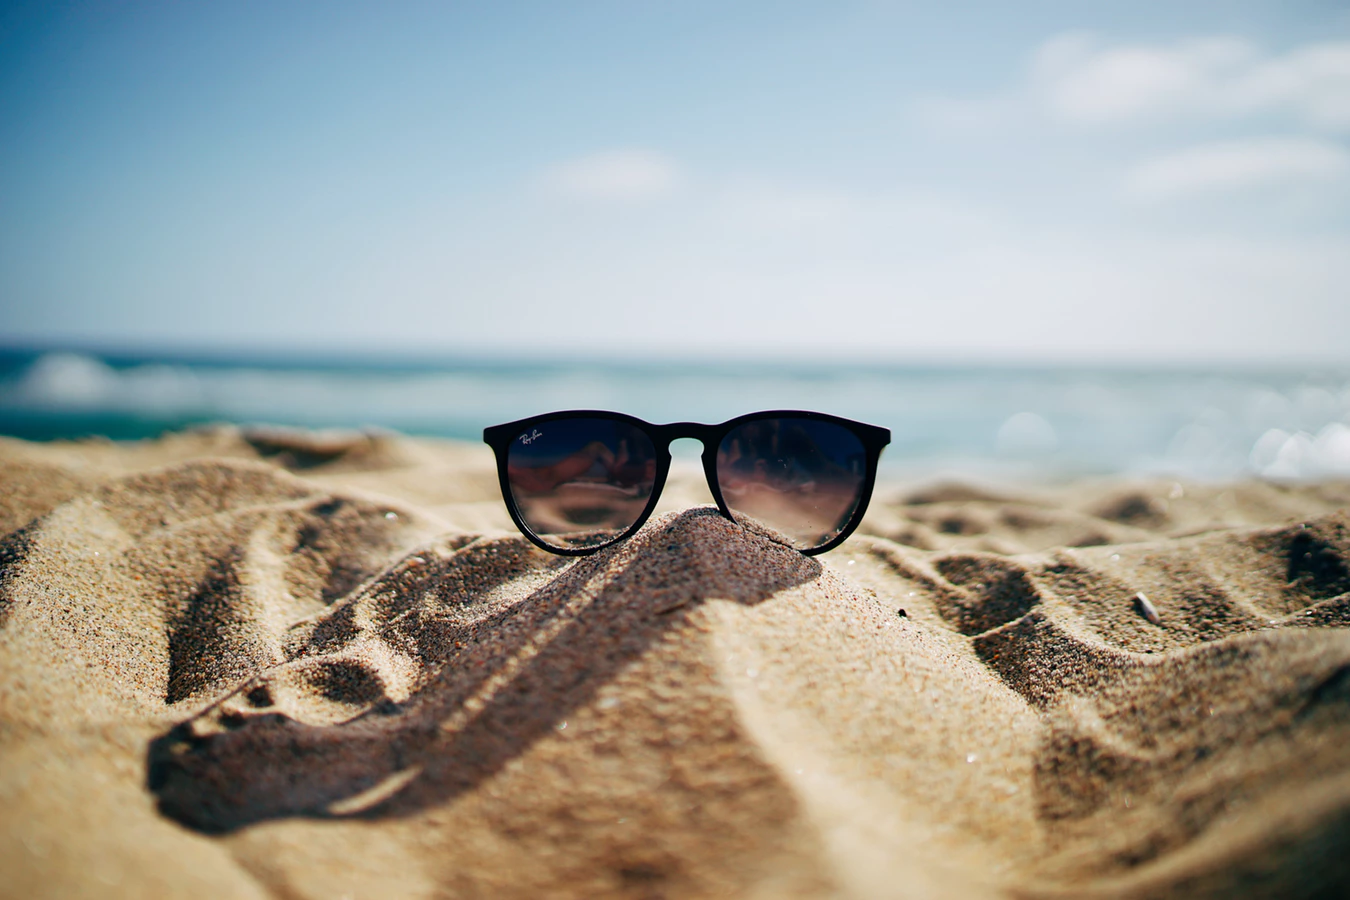 Sunglasses in the sand with the ocean in the background